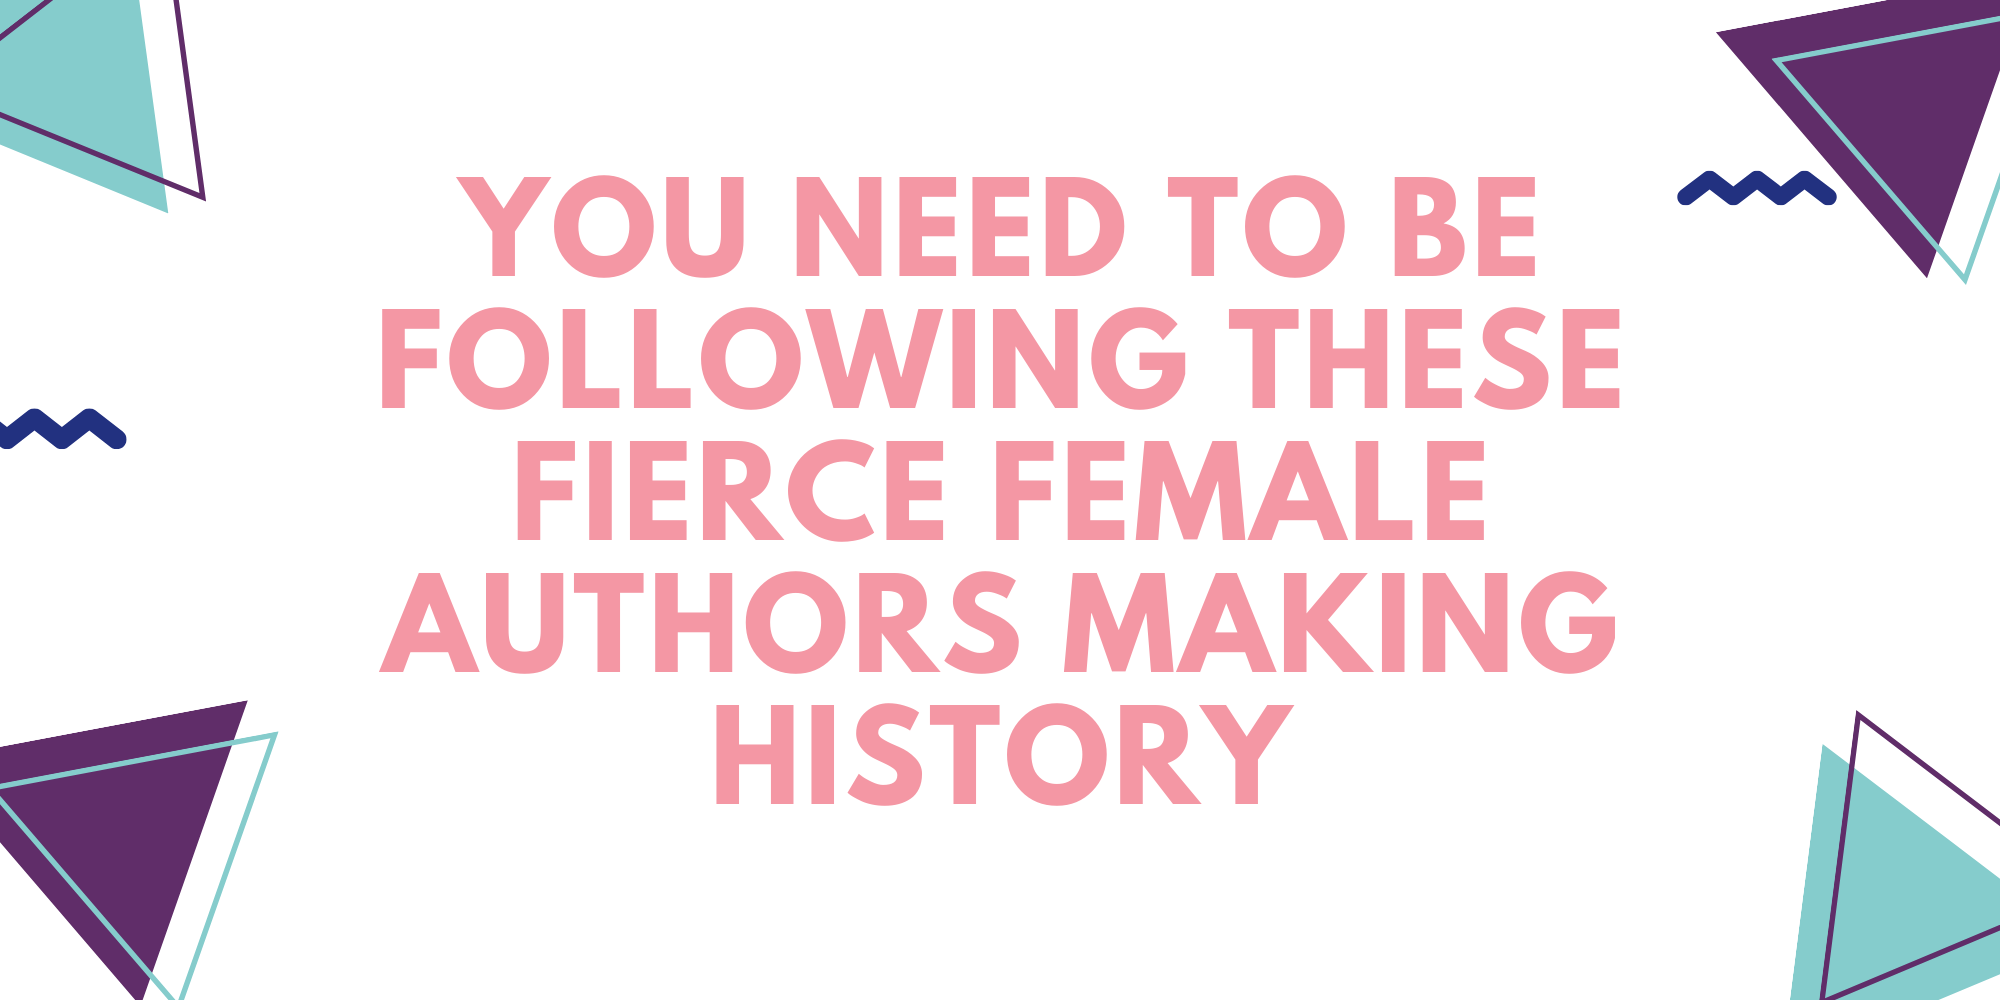 You Need to be Following These Fierce Female Authors Making History